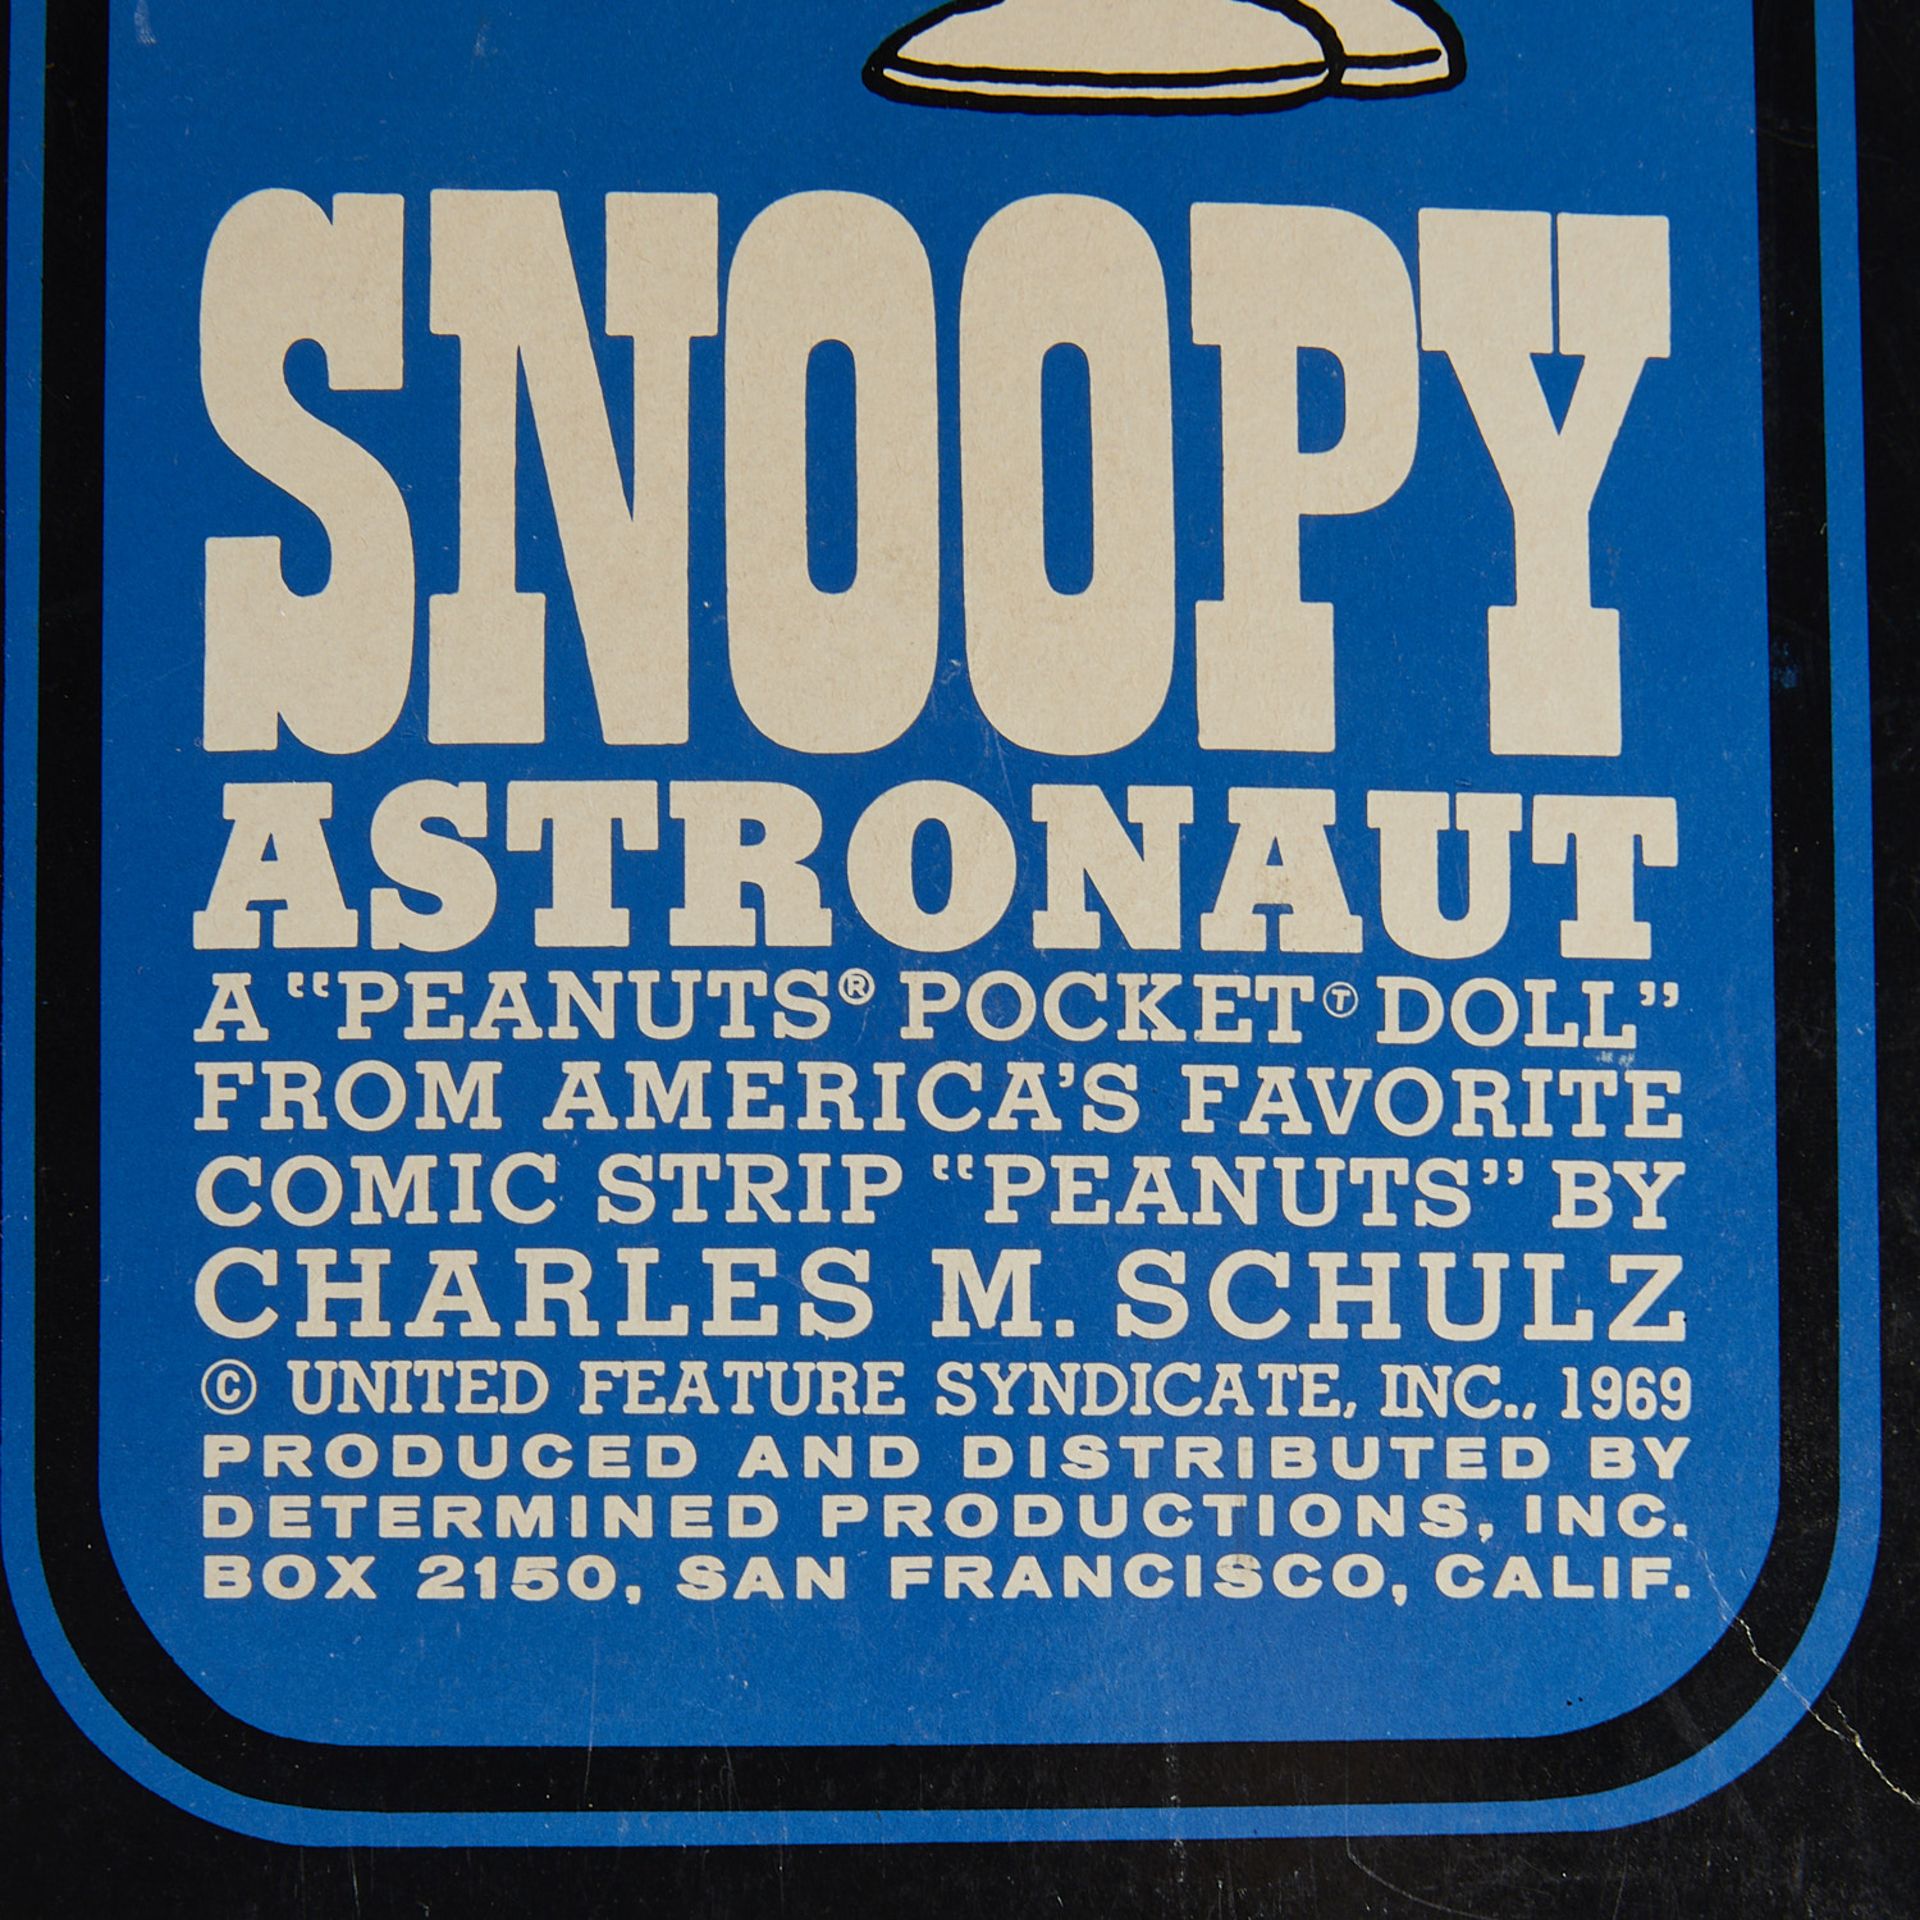 Snoopy Astronaut Pocket Doll with Box - Image 14 of 14